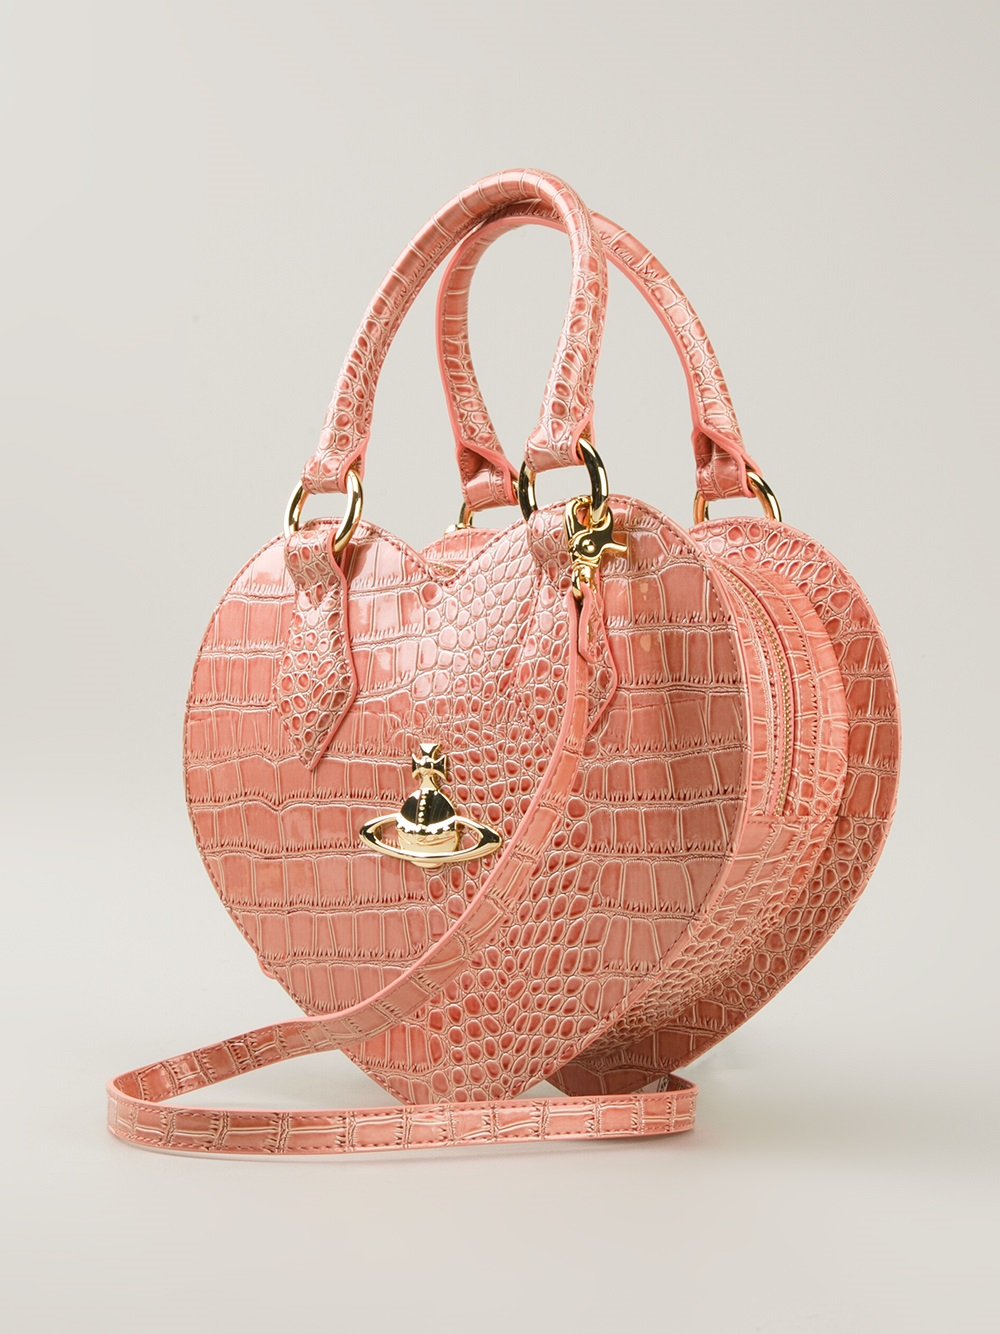 Lyst - Vivienne Westwood New Chancery Heart Bag in Pink